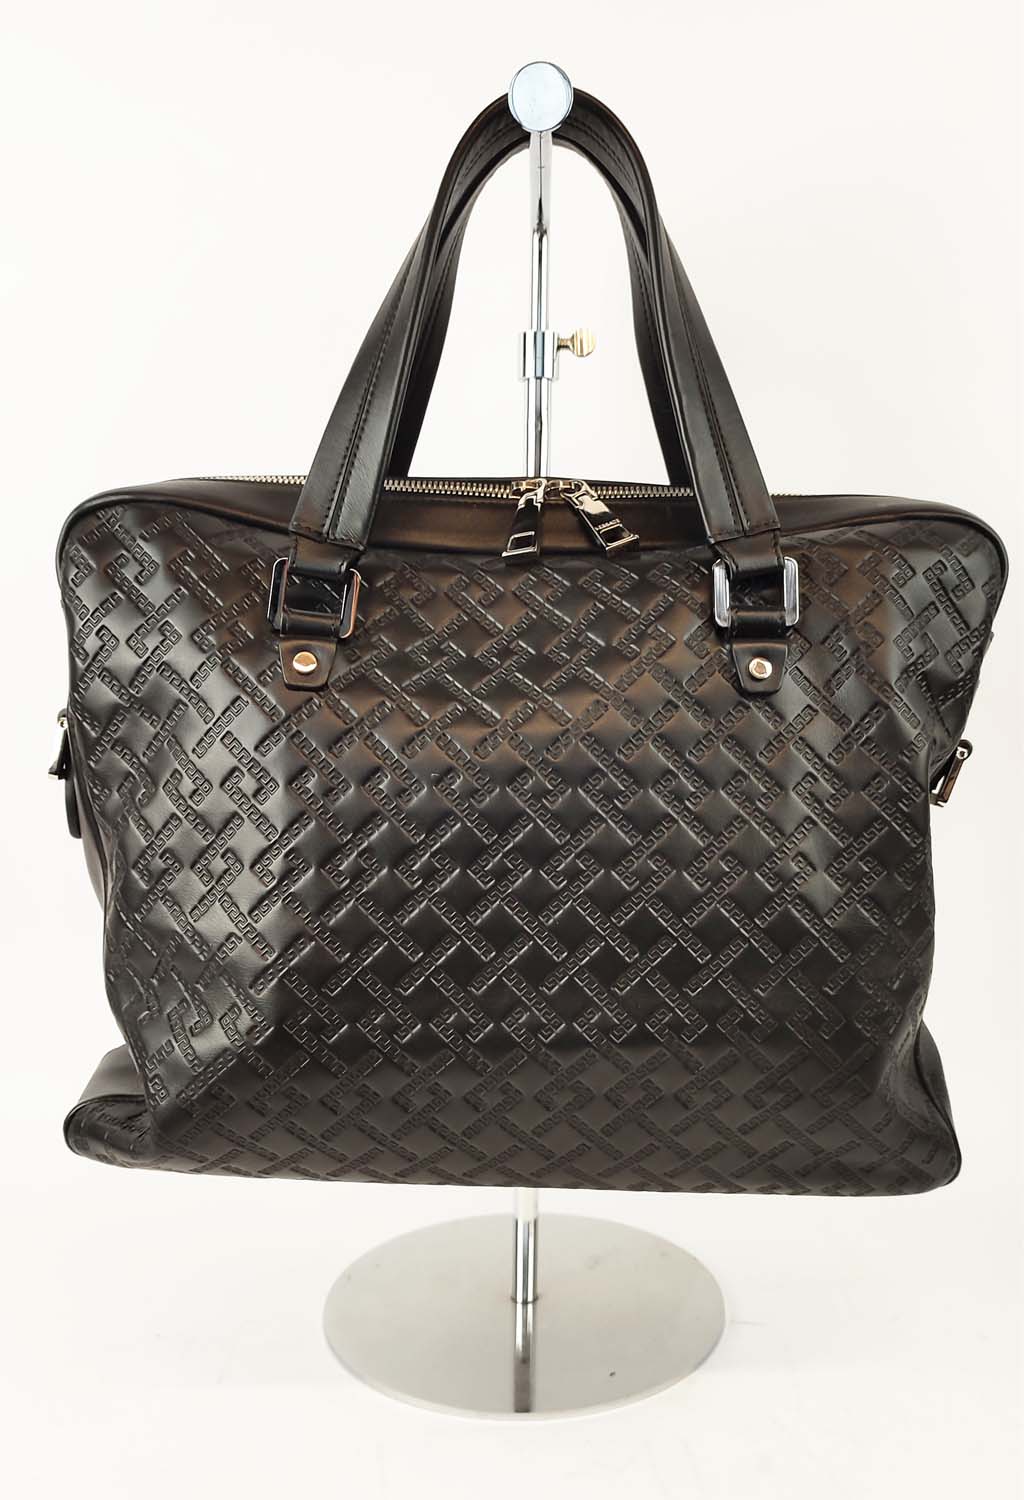 GIANNI VERSACE UNISEX BAG, leather with iconic embossed Greek decoration, silver tone hardware,